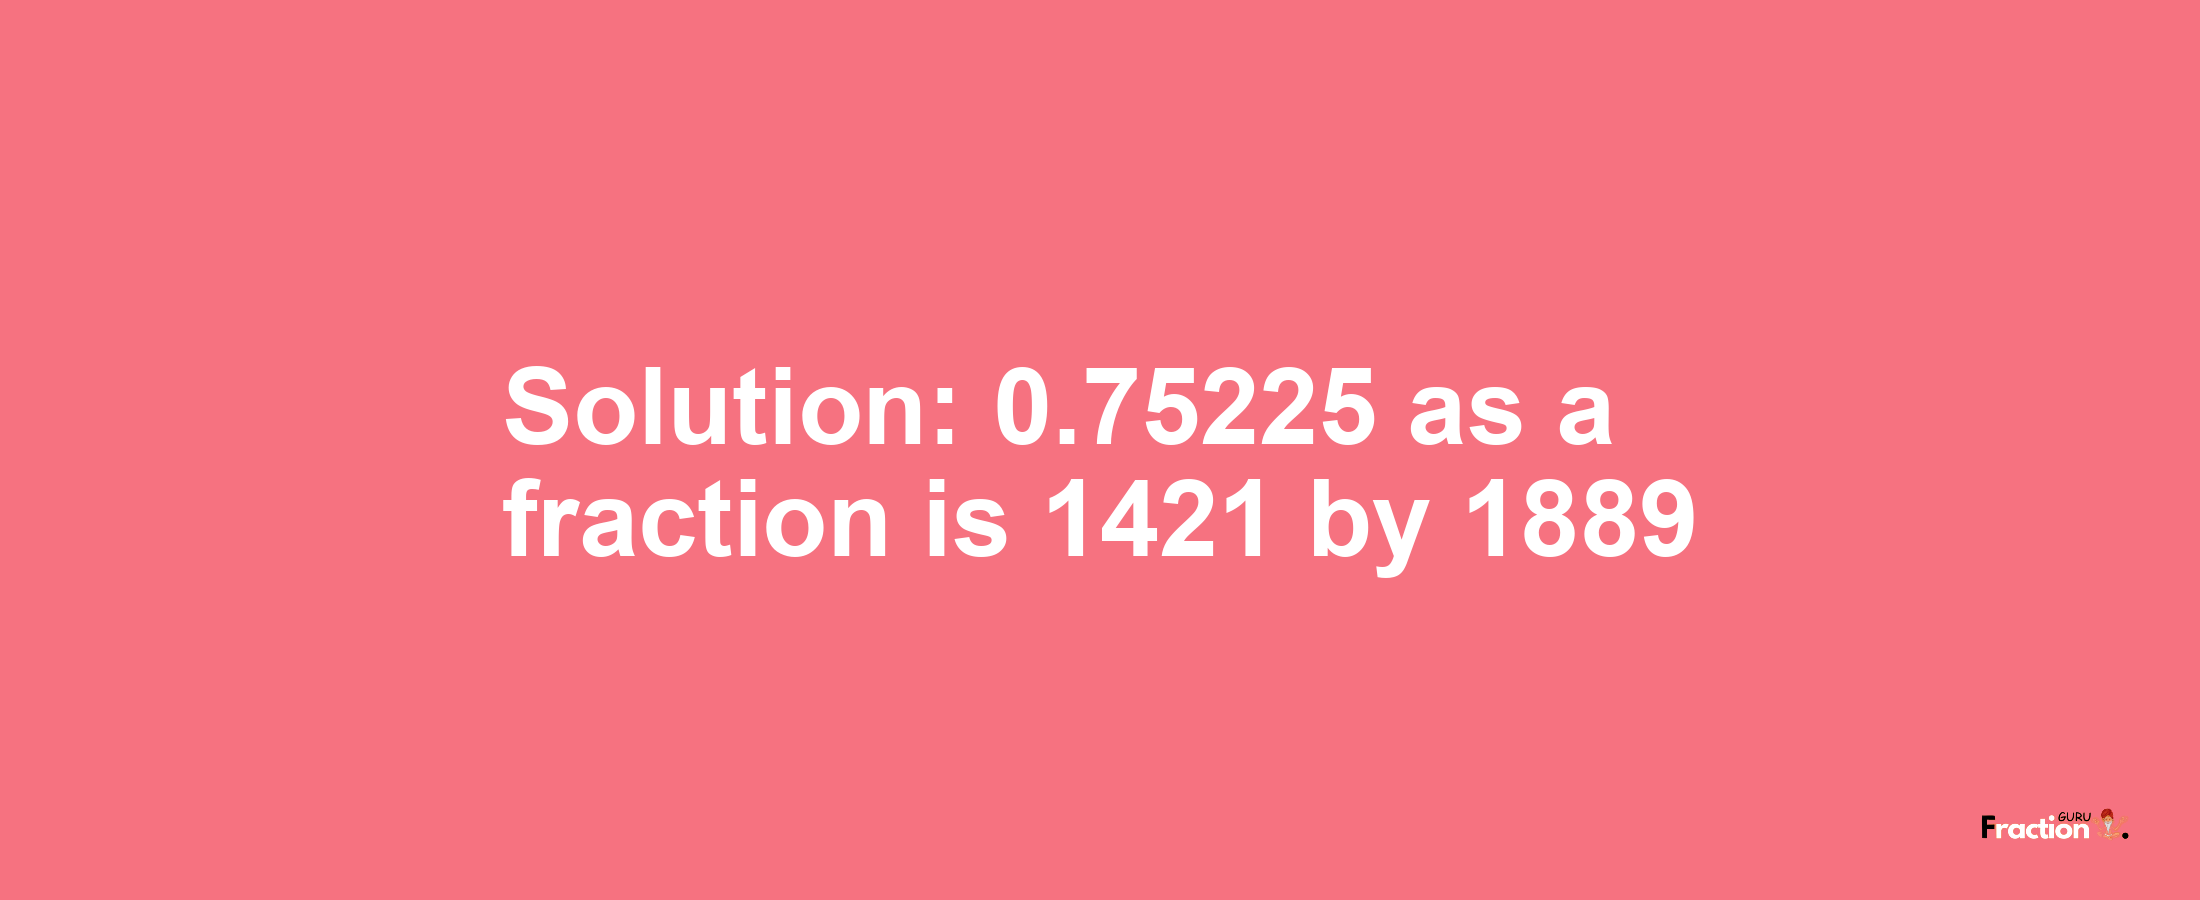 Solution:0.75225 as a fraction is 1421/1889